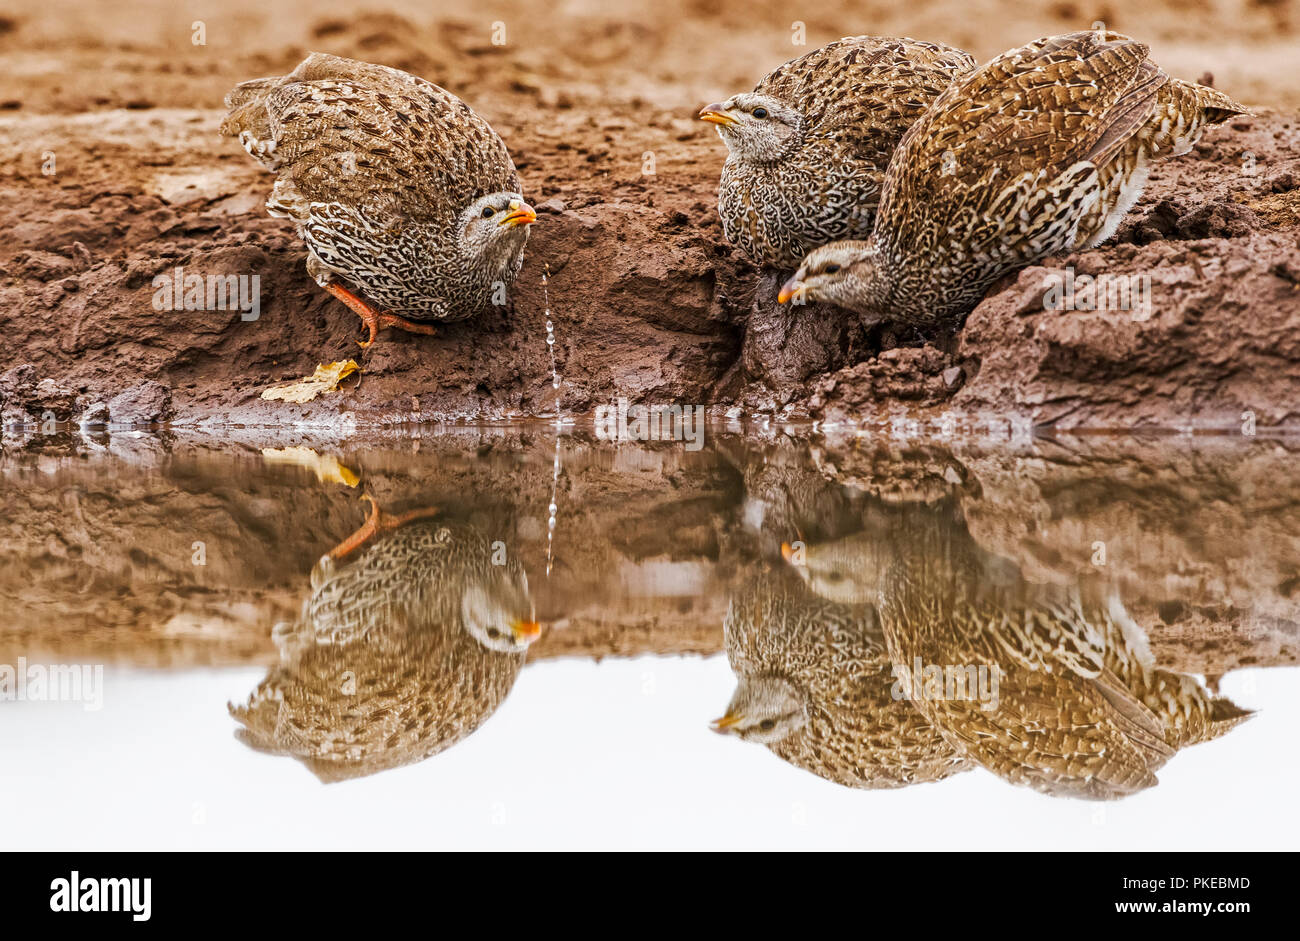 Three Natal spurfowl (Pternistis natalensis) drinking from the water's edge; Botswana Stock Photo